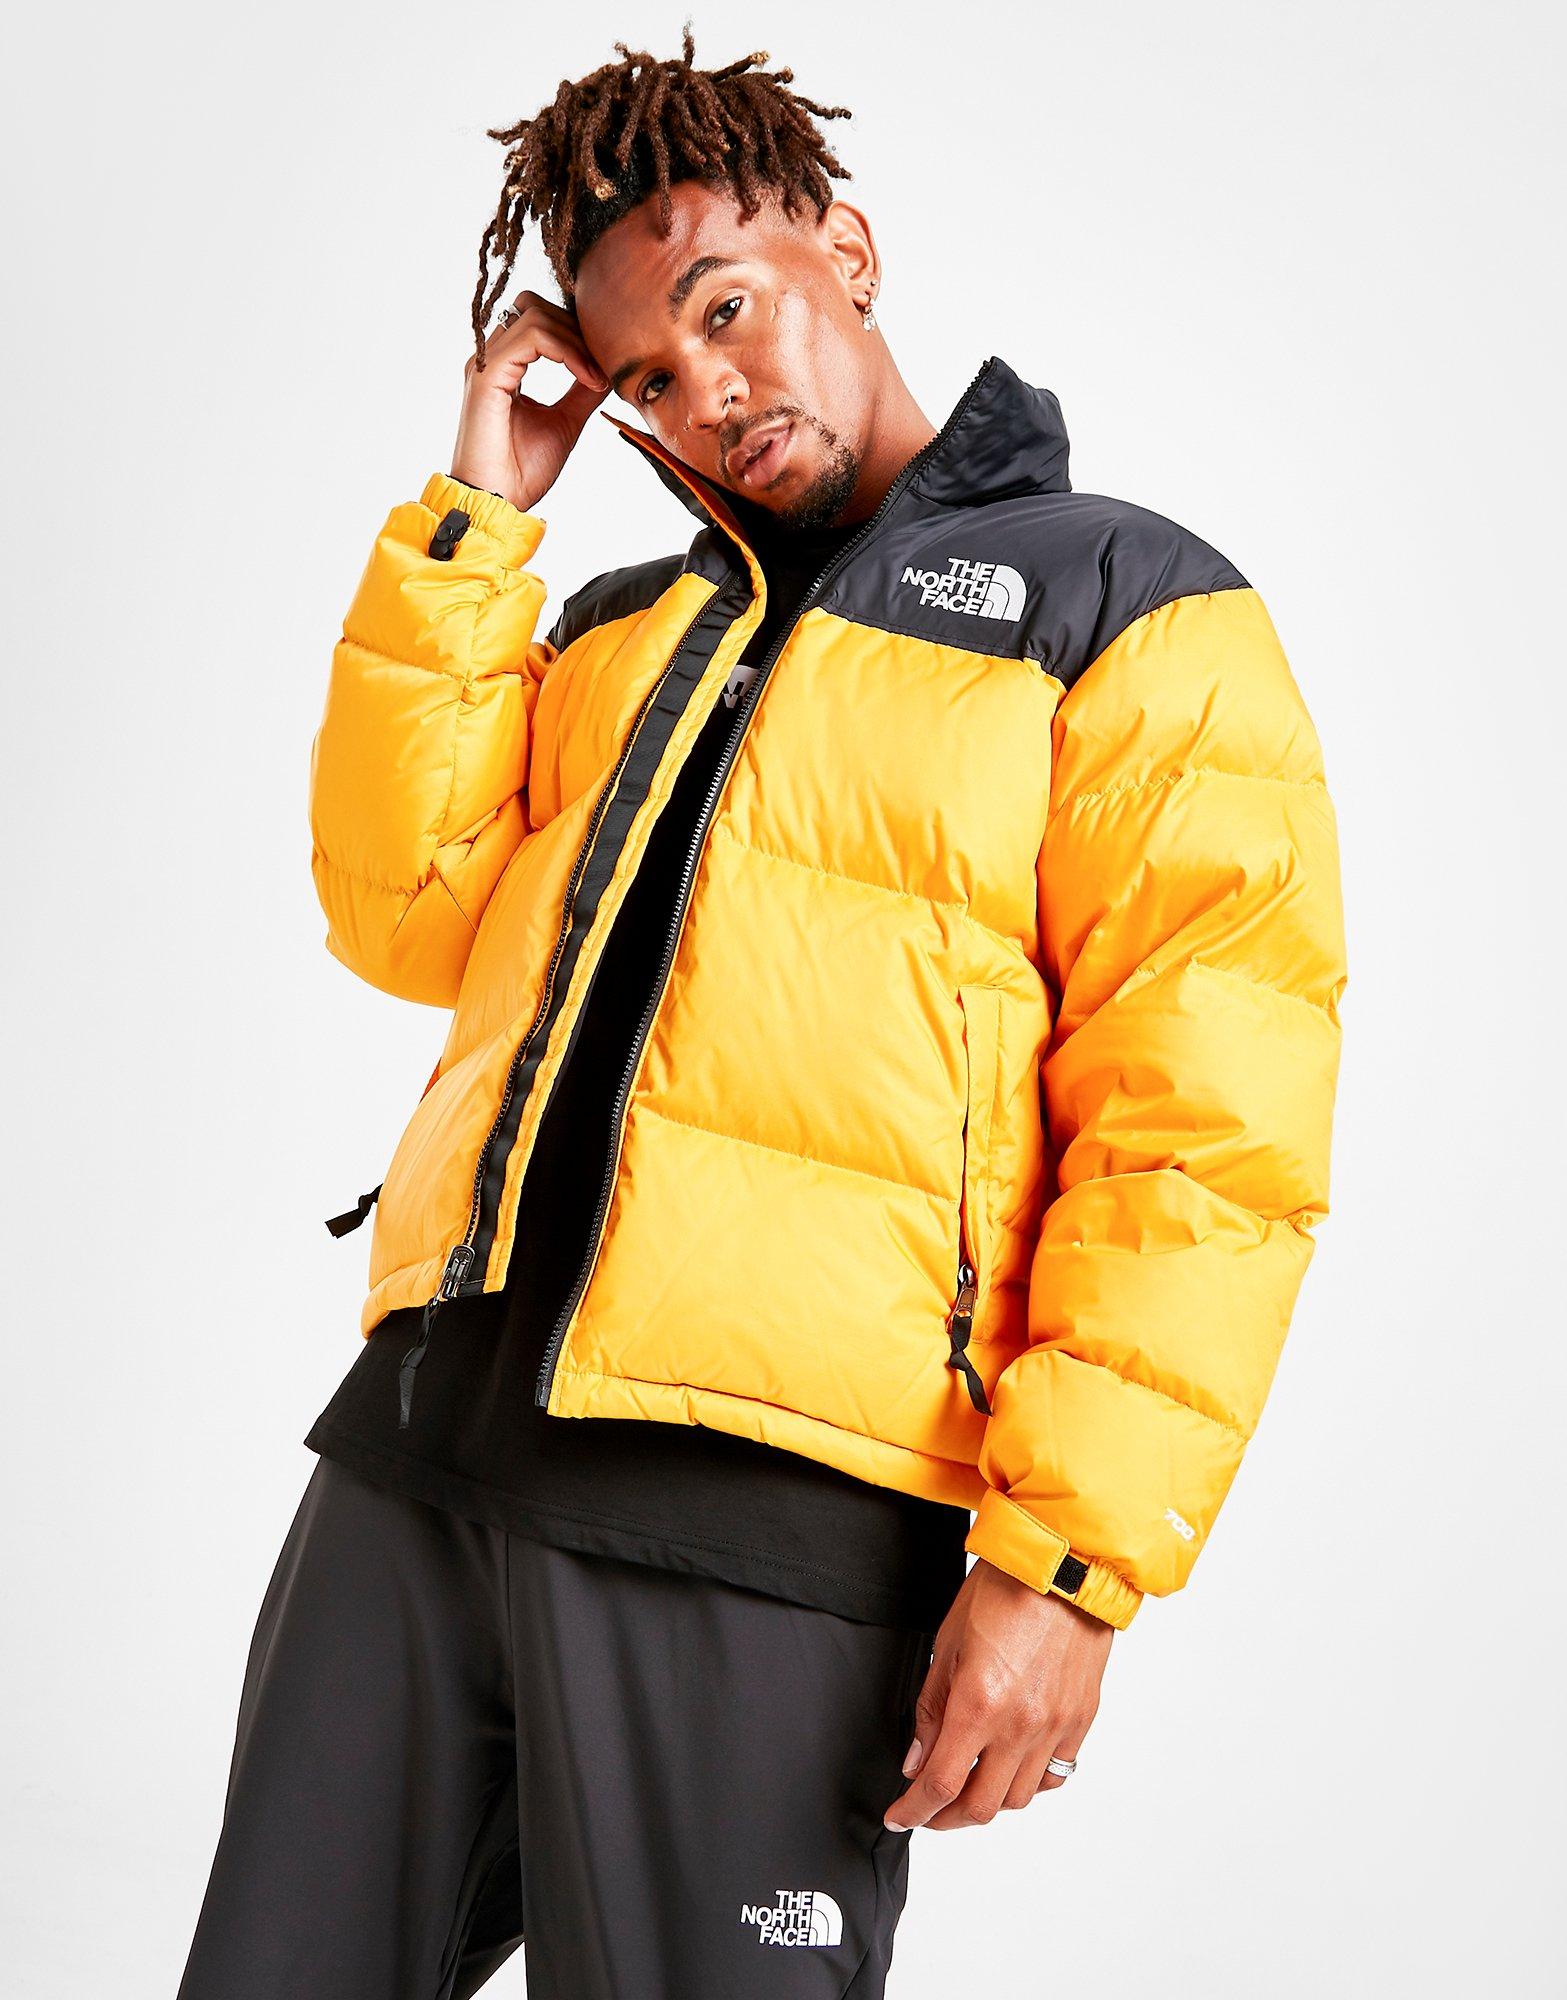 jd north face puffer